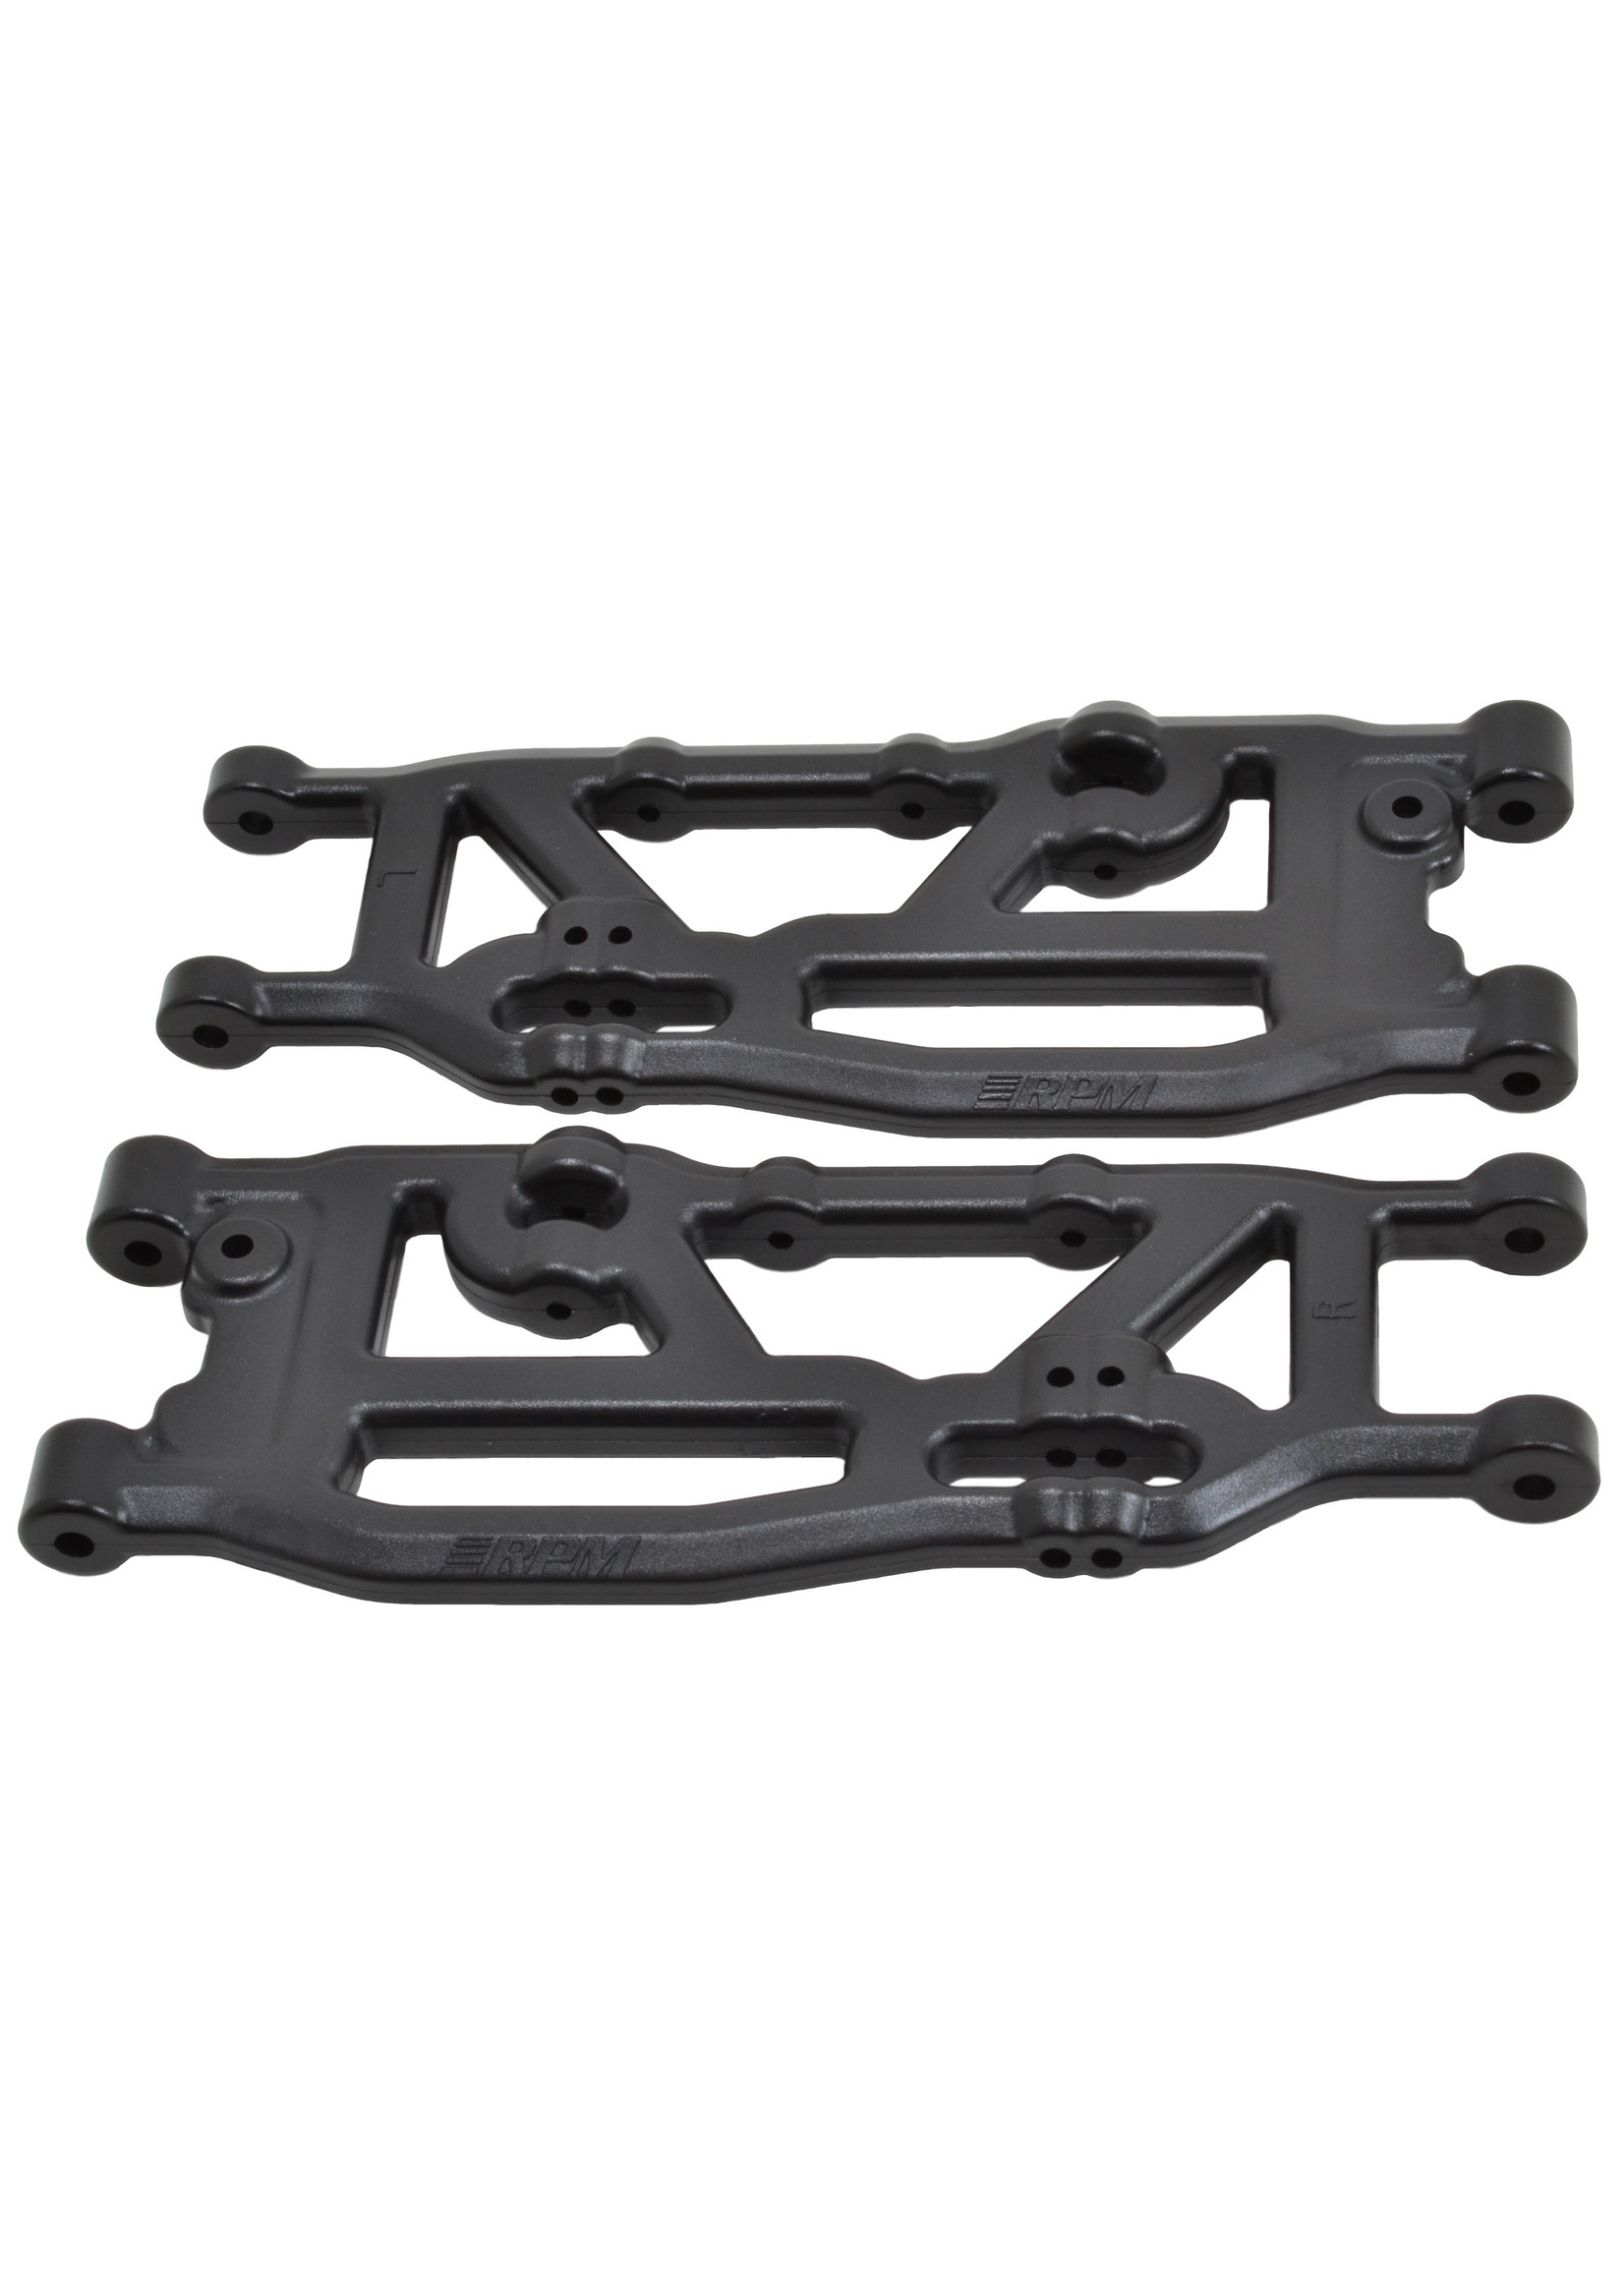 RPM 81402 - Rear A-arms for 6S versions of ARRMA Kraton, Talion & Outcast - Black